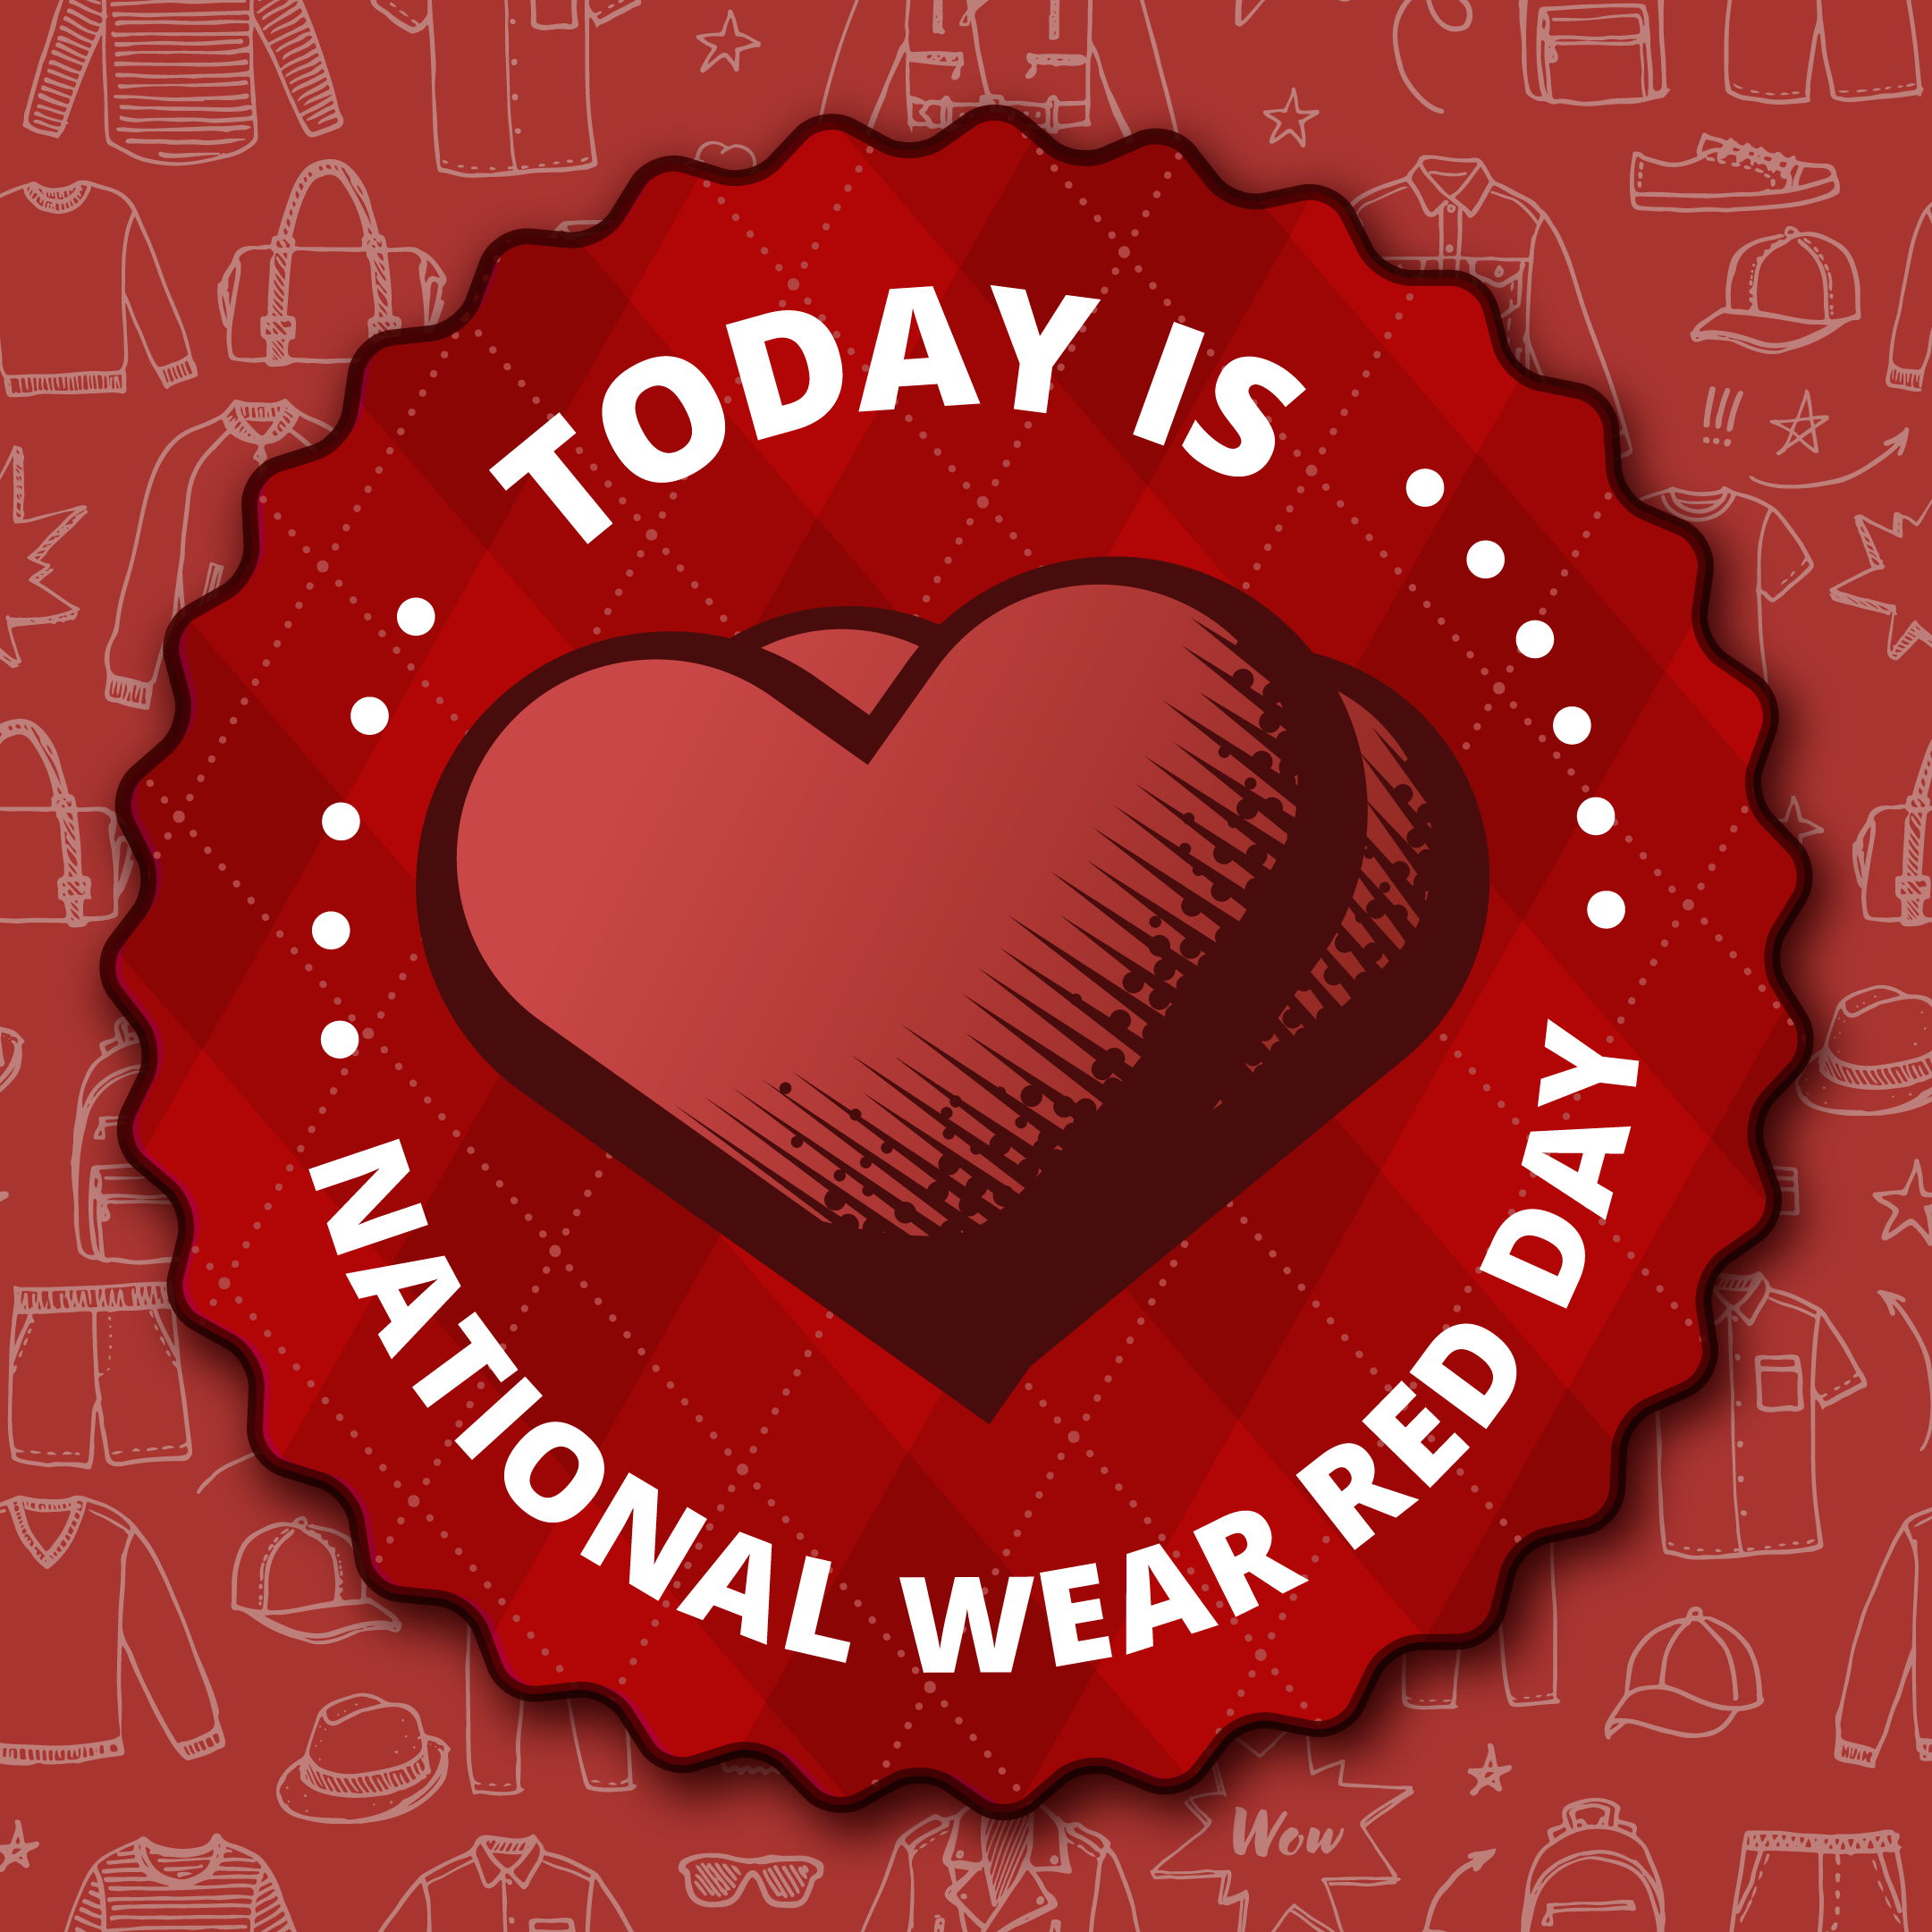 National Wear Red Day® HHS.gov